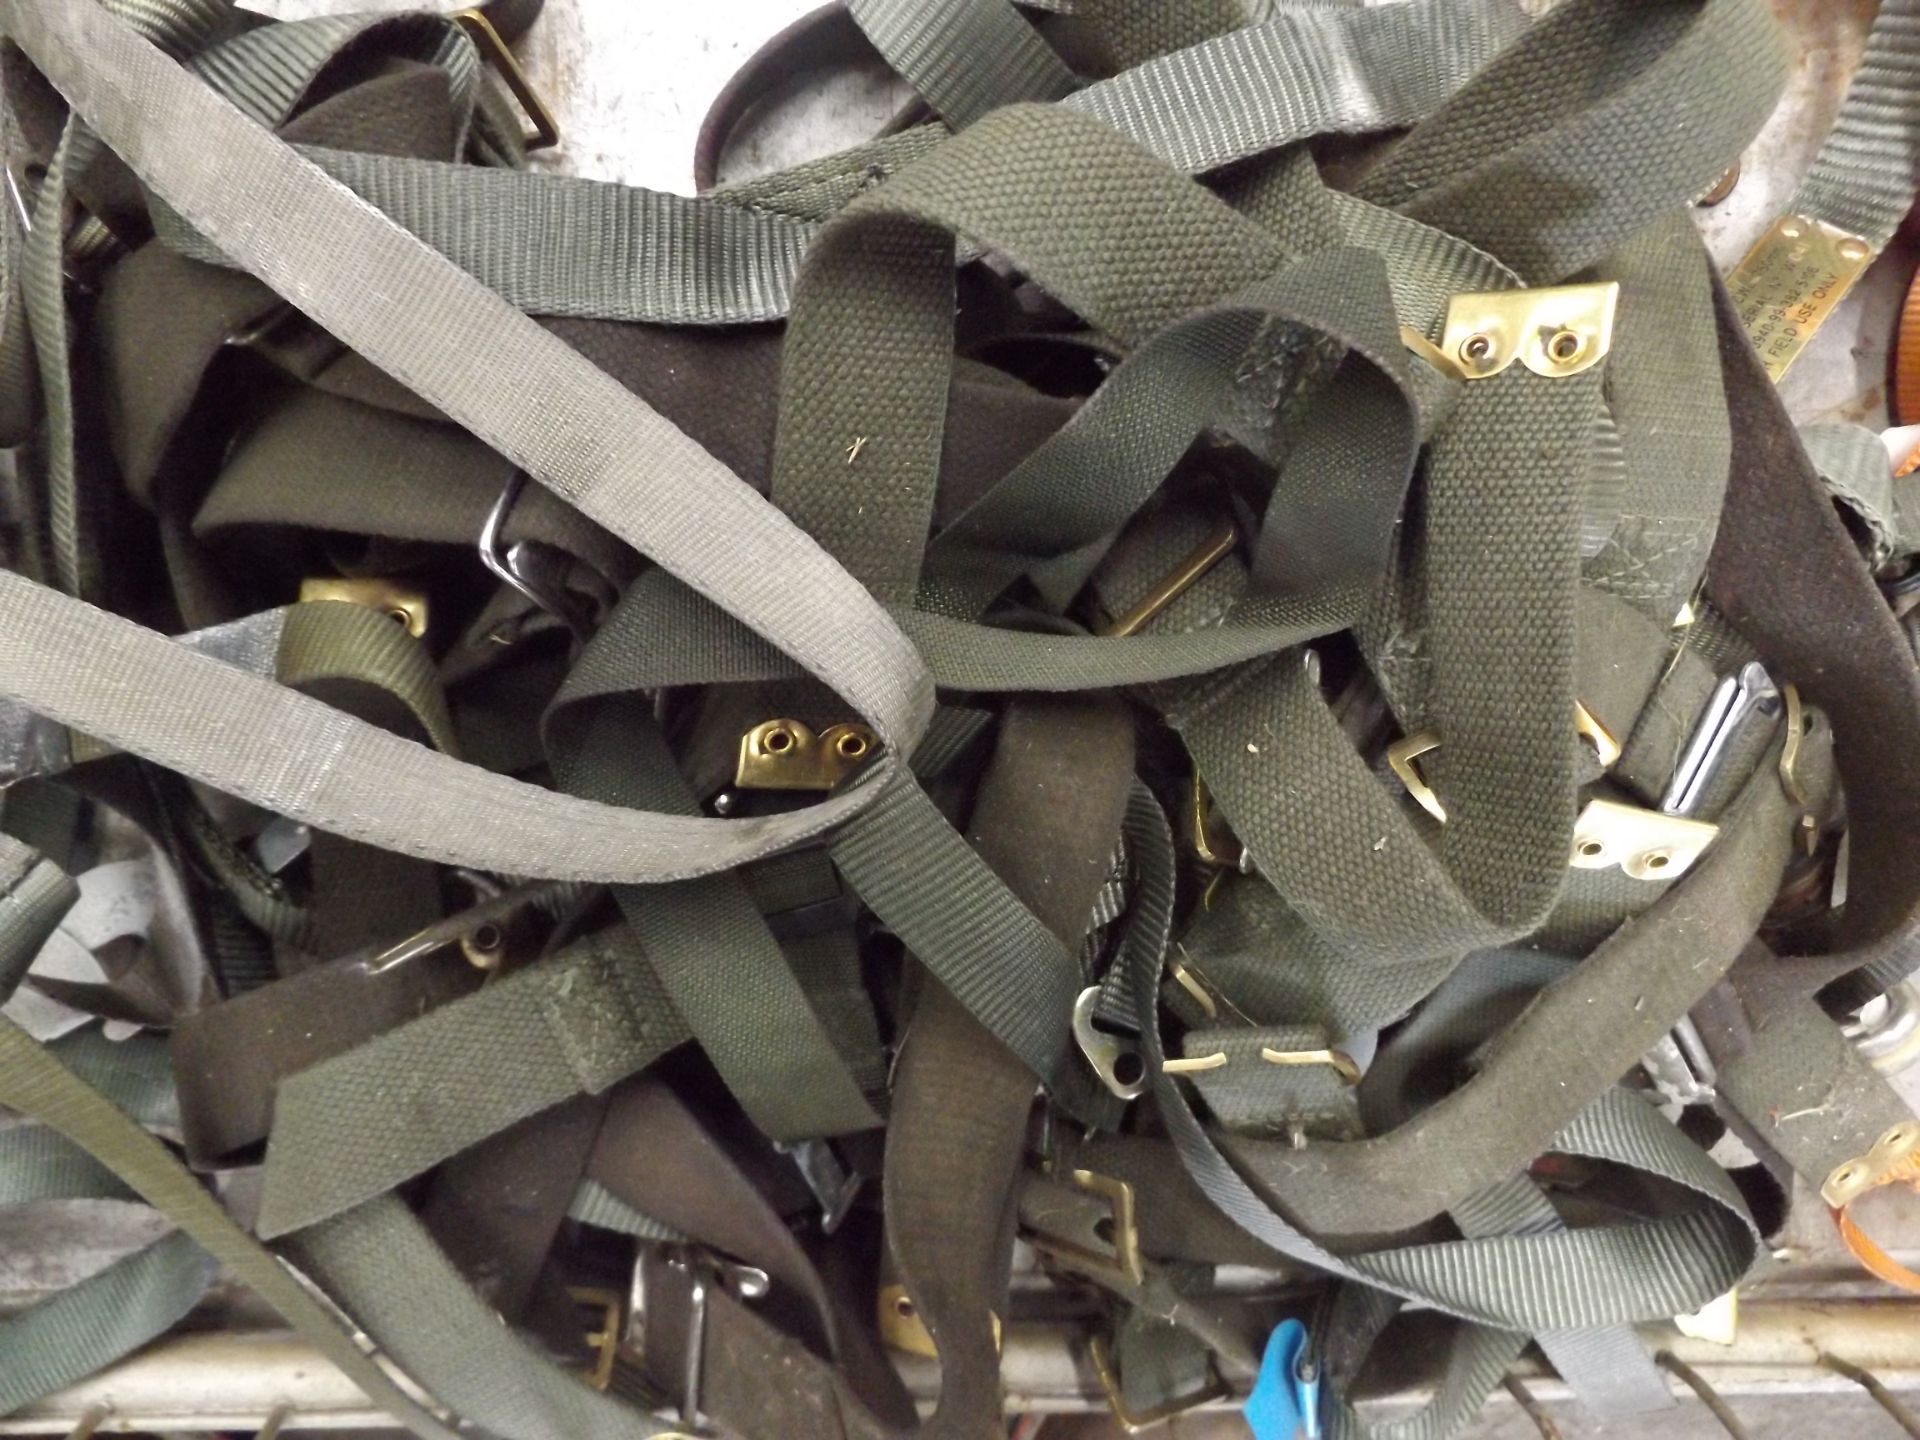 Mixed Stillage of Ratchets, Straps and Harnesses - Image 5 of 7